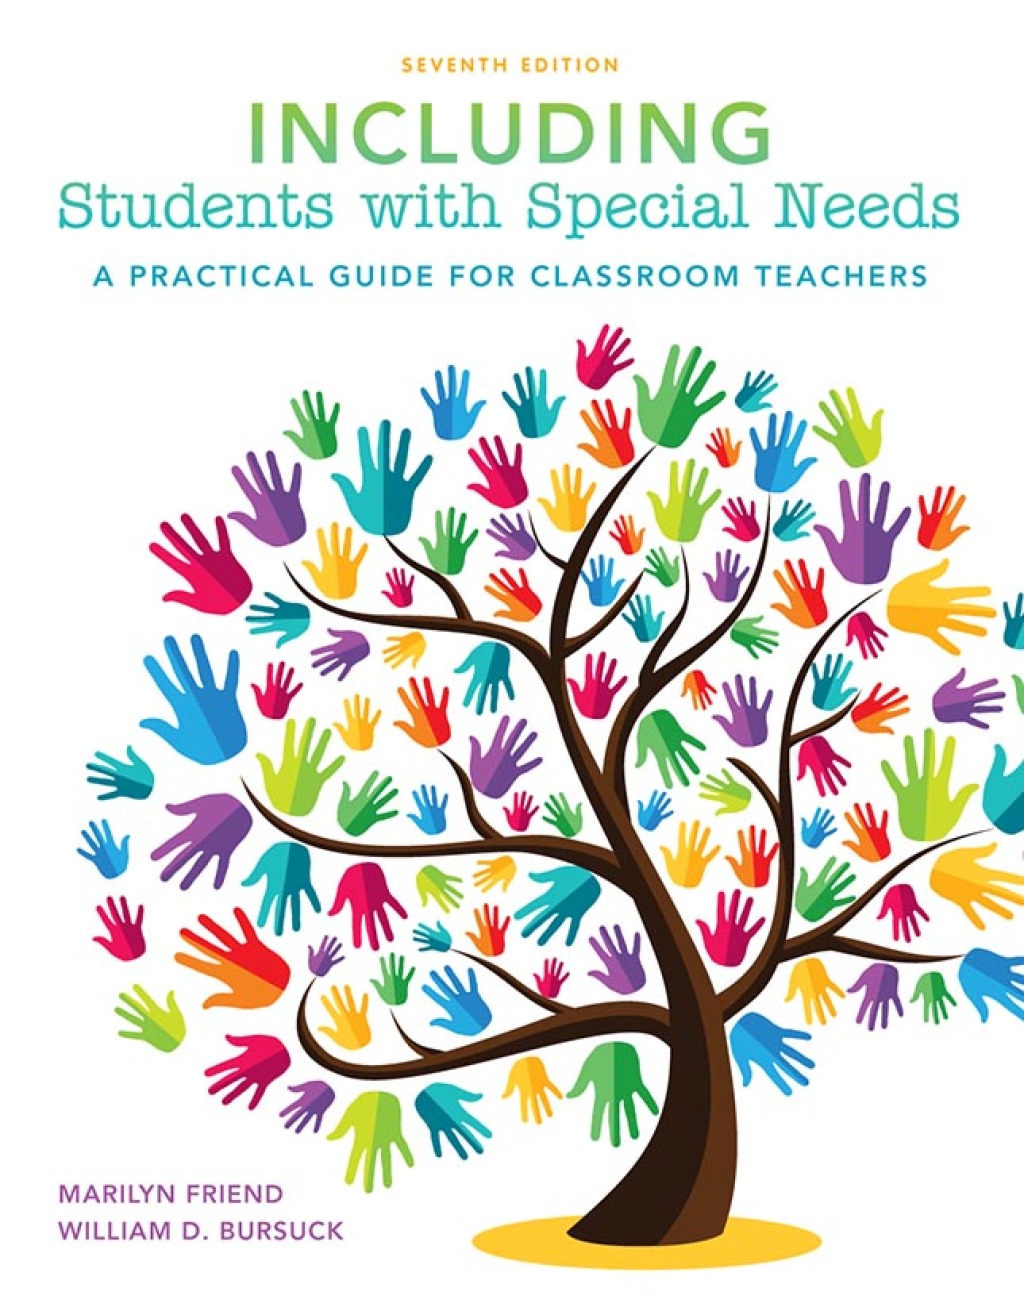 Including Students with Special Needs (eBook) - Marilyn Friend